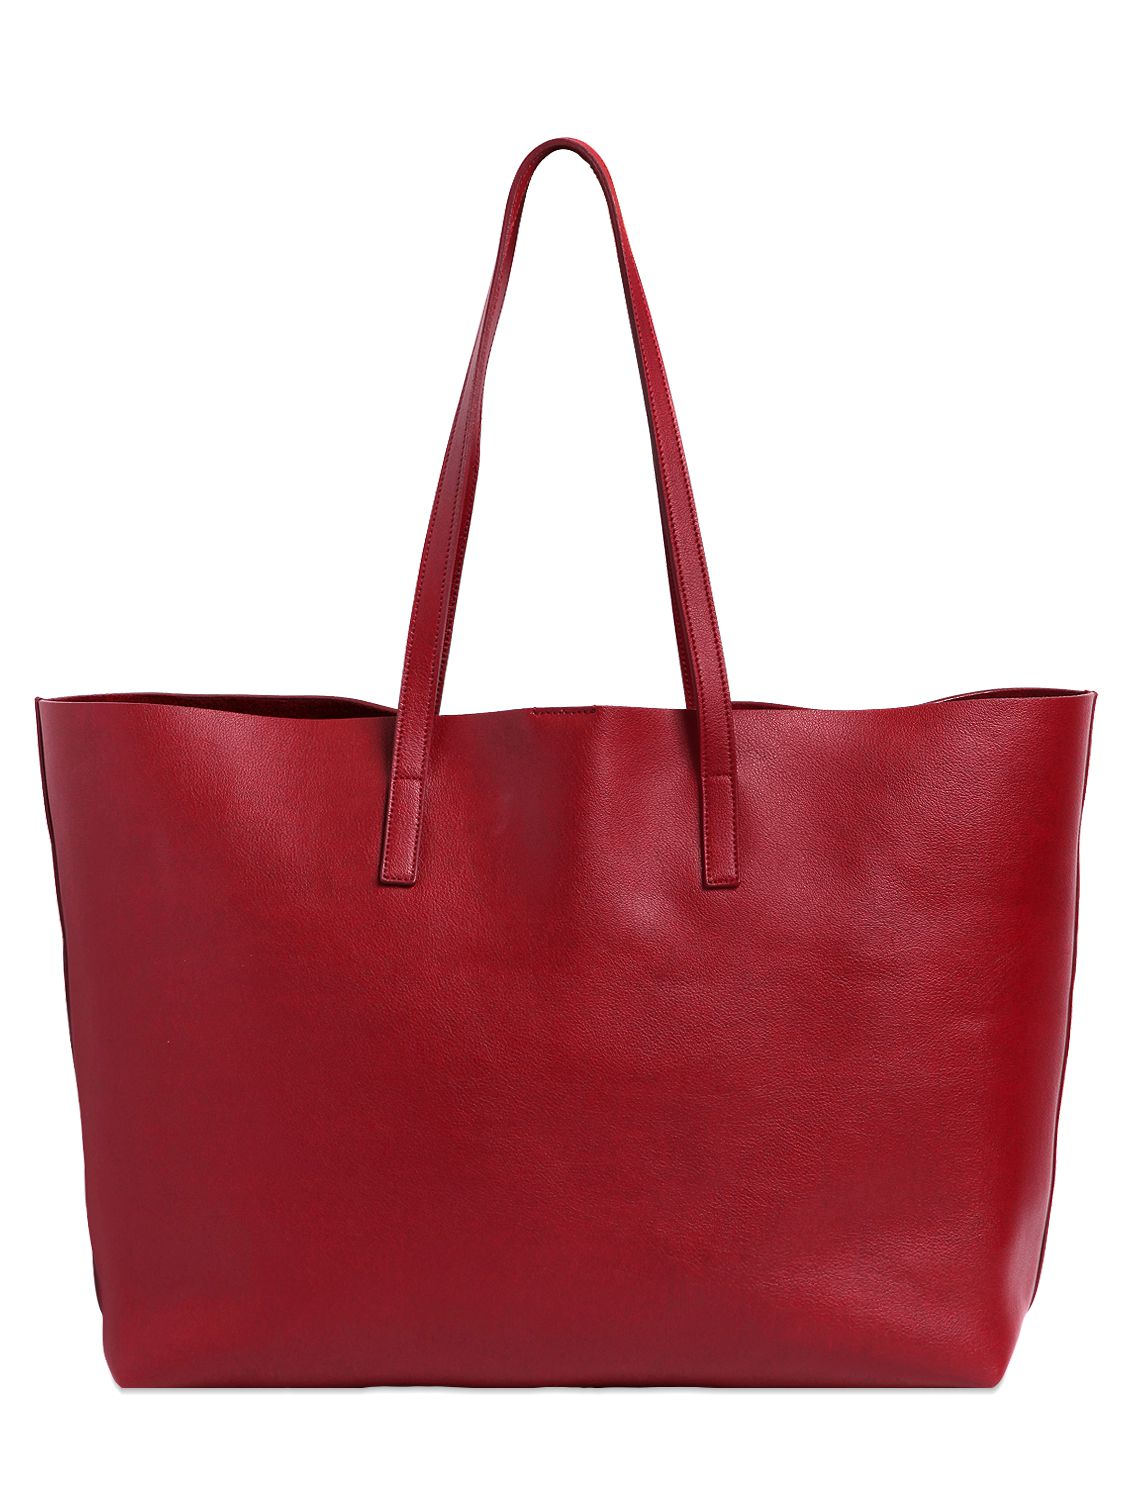 Saint Laurent Soft Leather Tote Bag in Red - Lyst